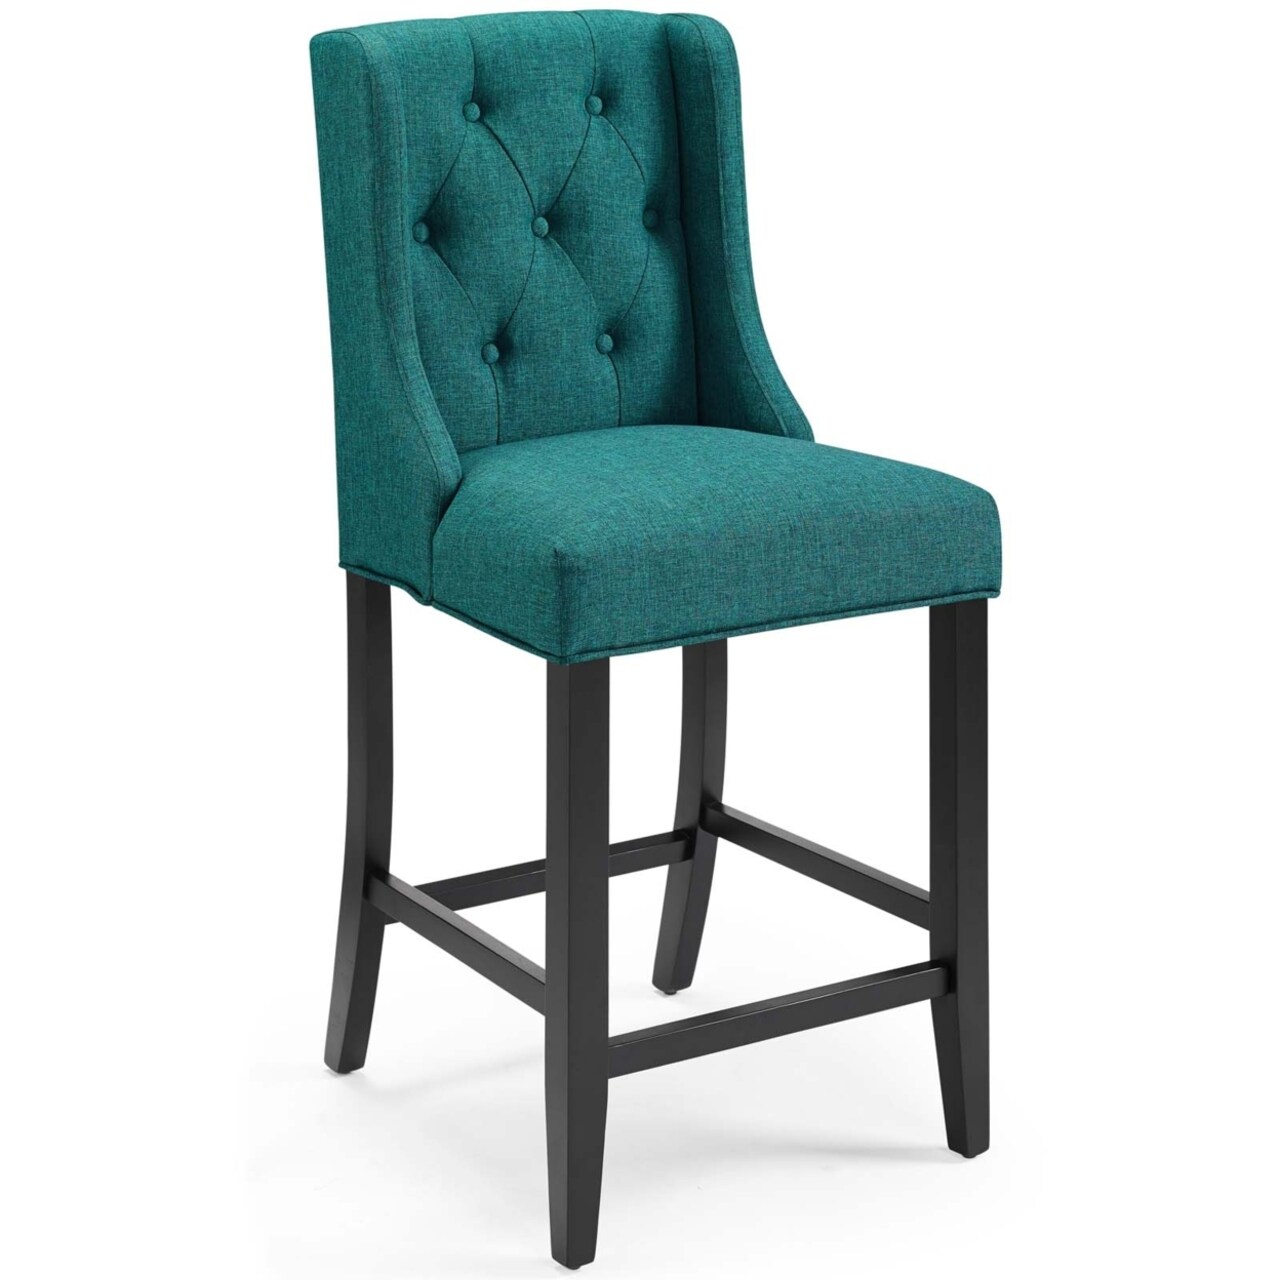 Modway Baronet Tufted Button Upholstered Fabric Counter Stool,Teal